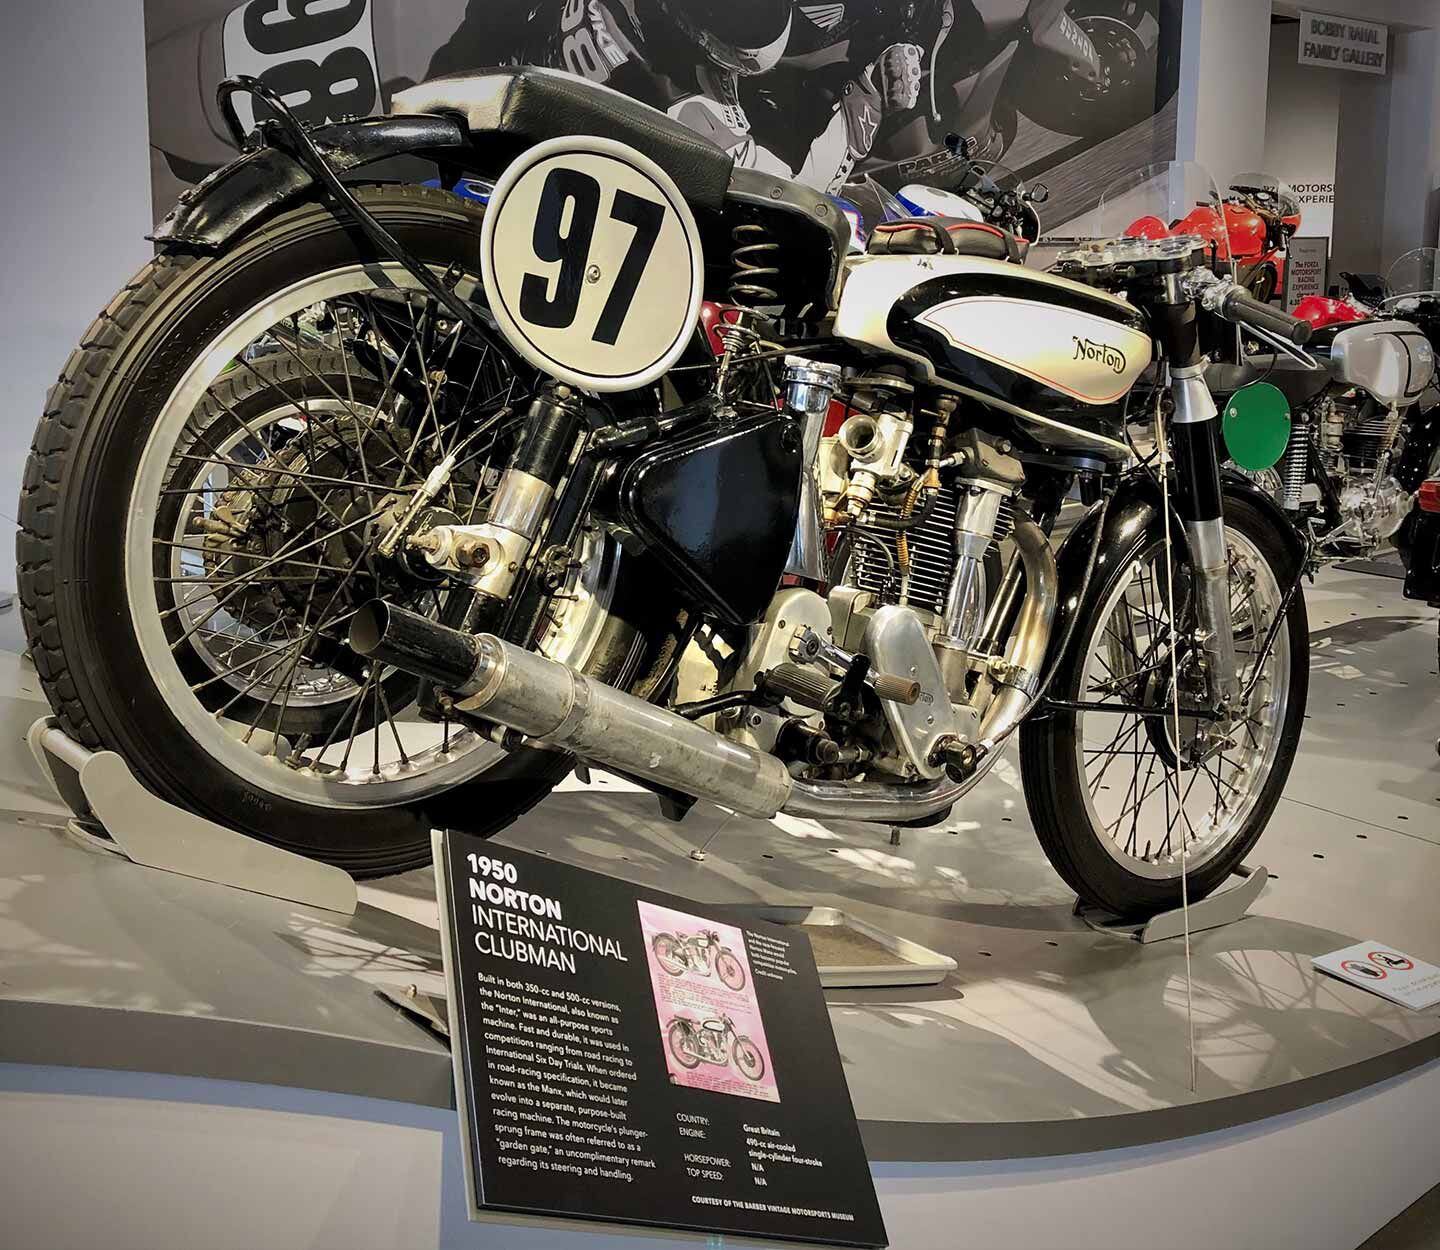 This 1950 Norton International Clubman, known as the Inter, could be configured to compete in everything from trials to roadracing. In roadrace form it eventually evolved into Norton’s Manx model.